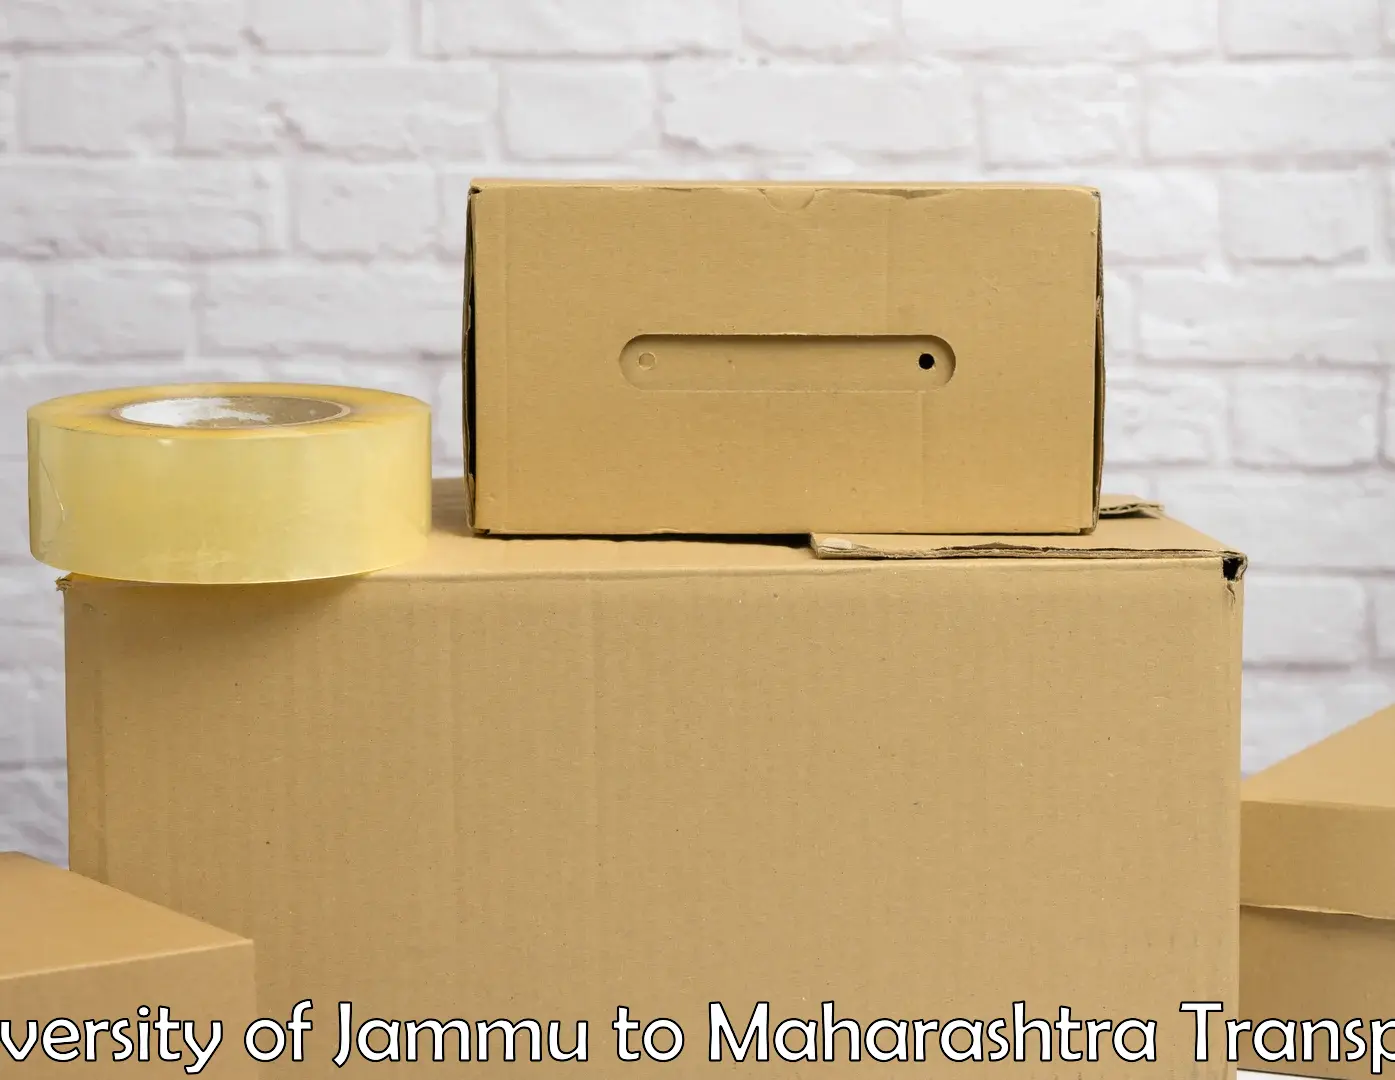 Parcel transport services University of Jammu to Dharmabad